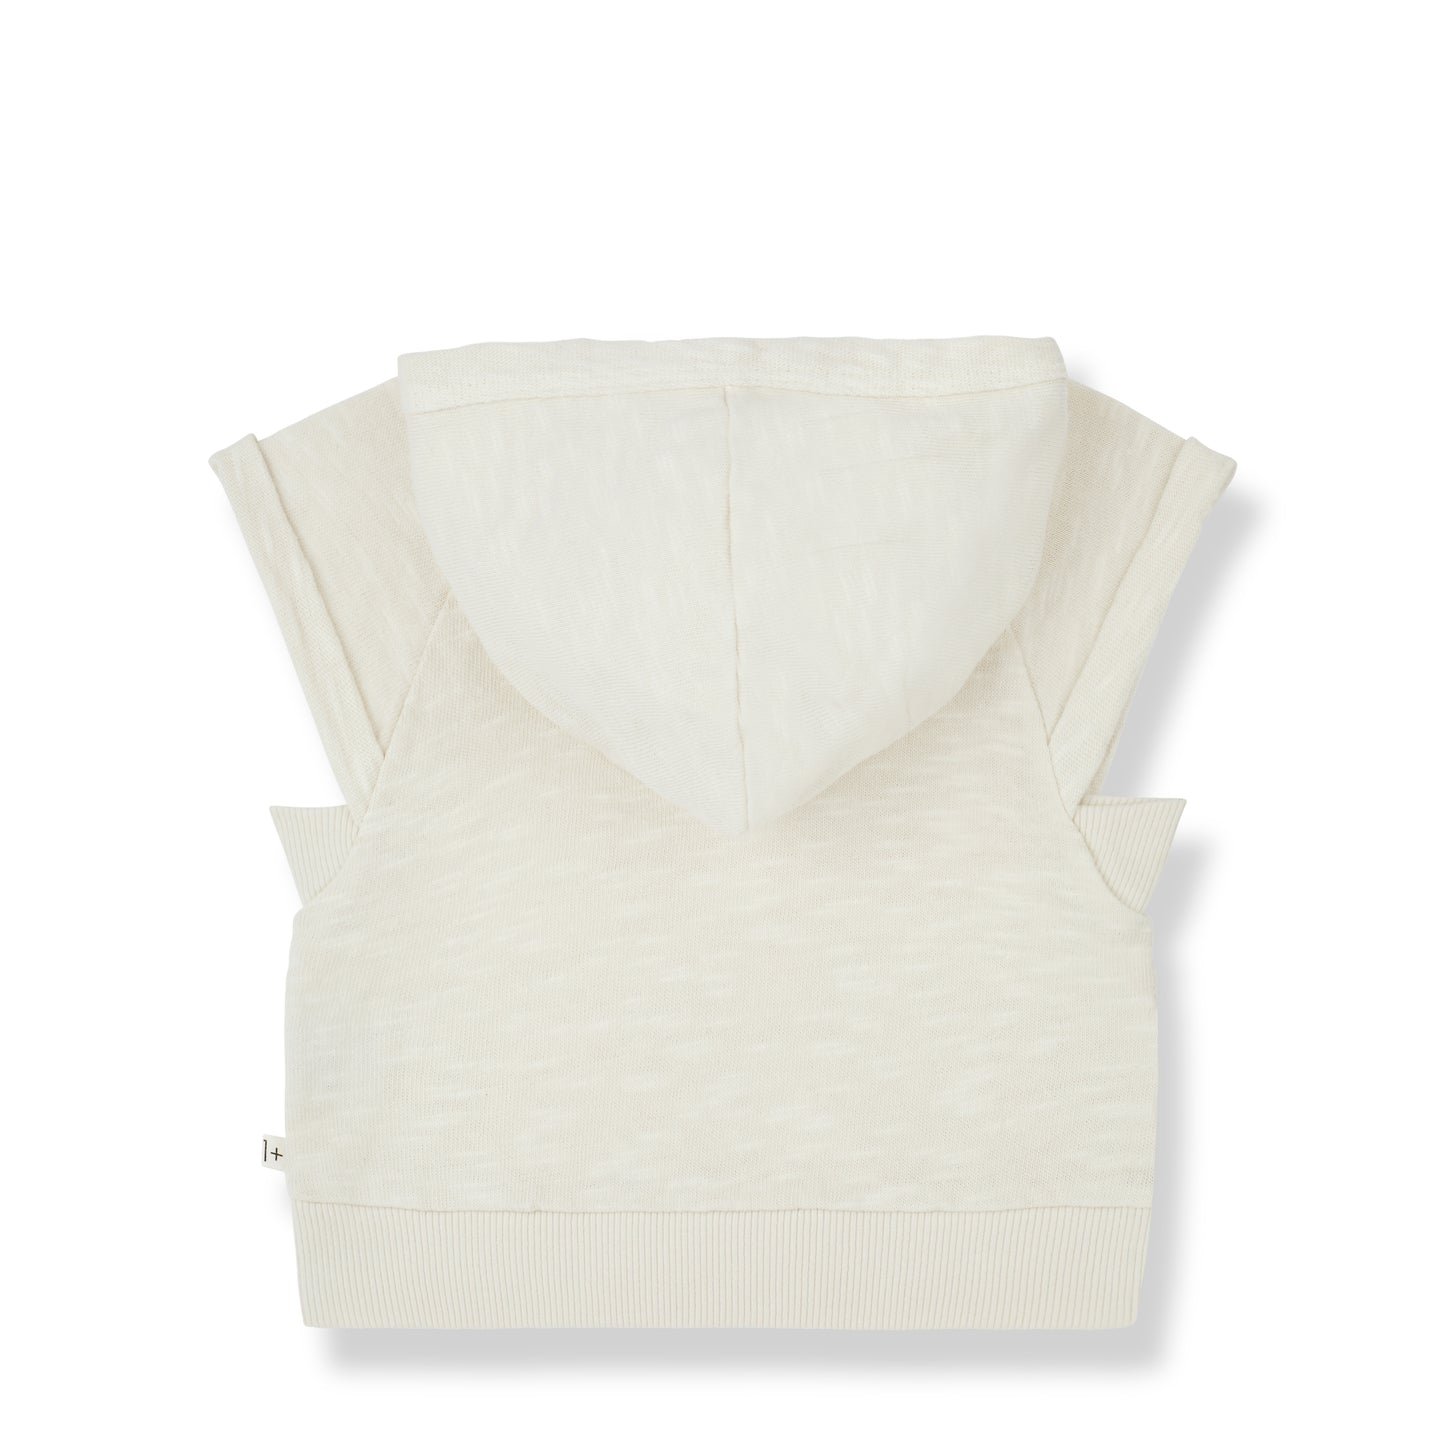 1 + IN THE FAMILY IVORY SLEEVELESS HOODED TEE